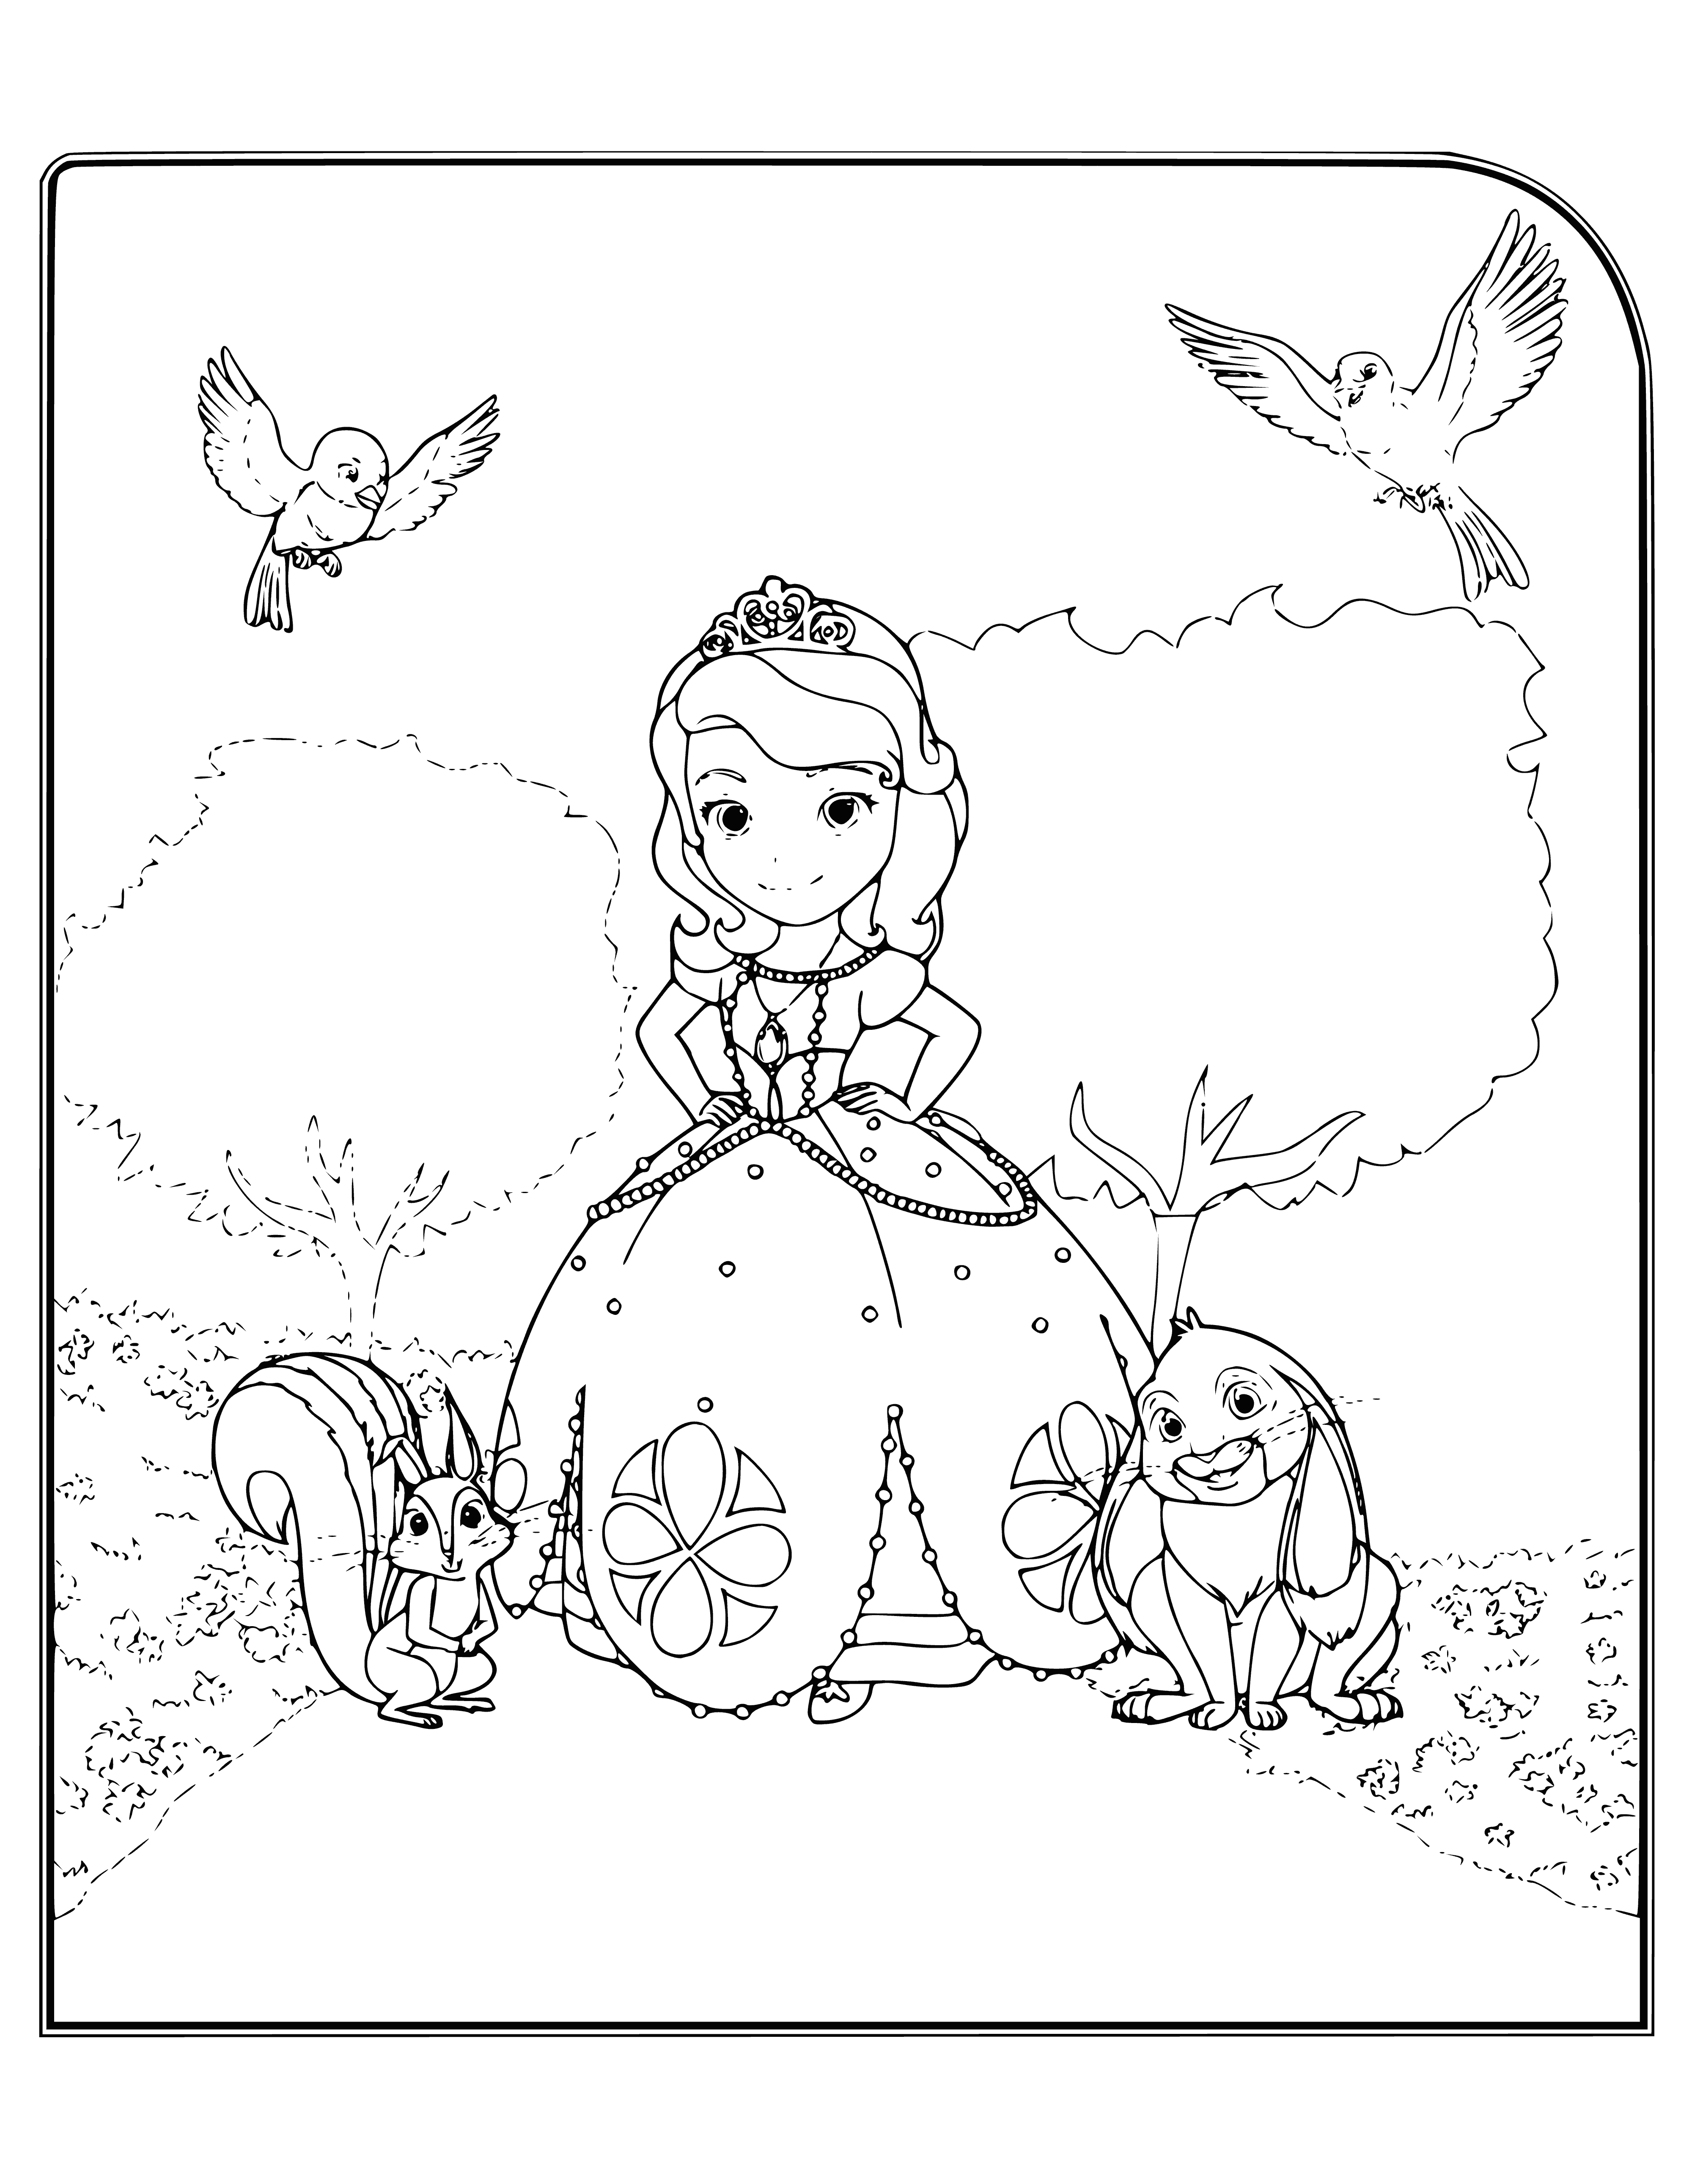 coloring page: Sofia is content with her two pets, a white rabbit and orange kitten, while wearing her purple dress and gold tiara. Her hands are clasped in front of her with a big smile.